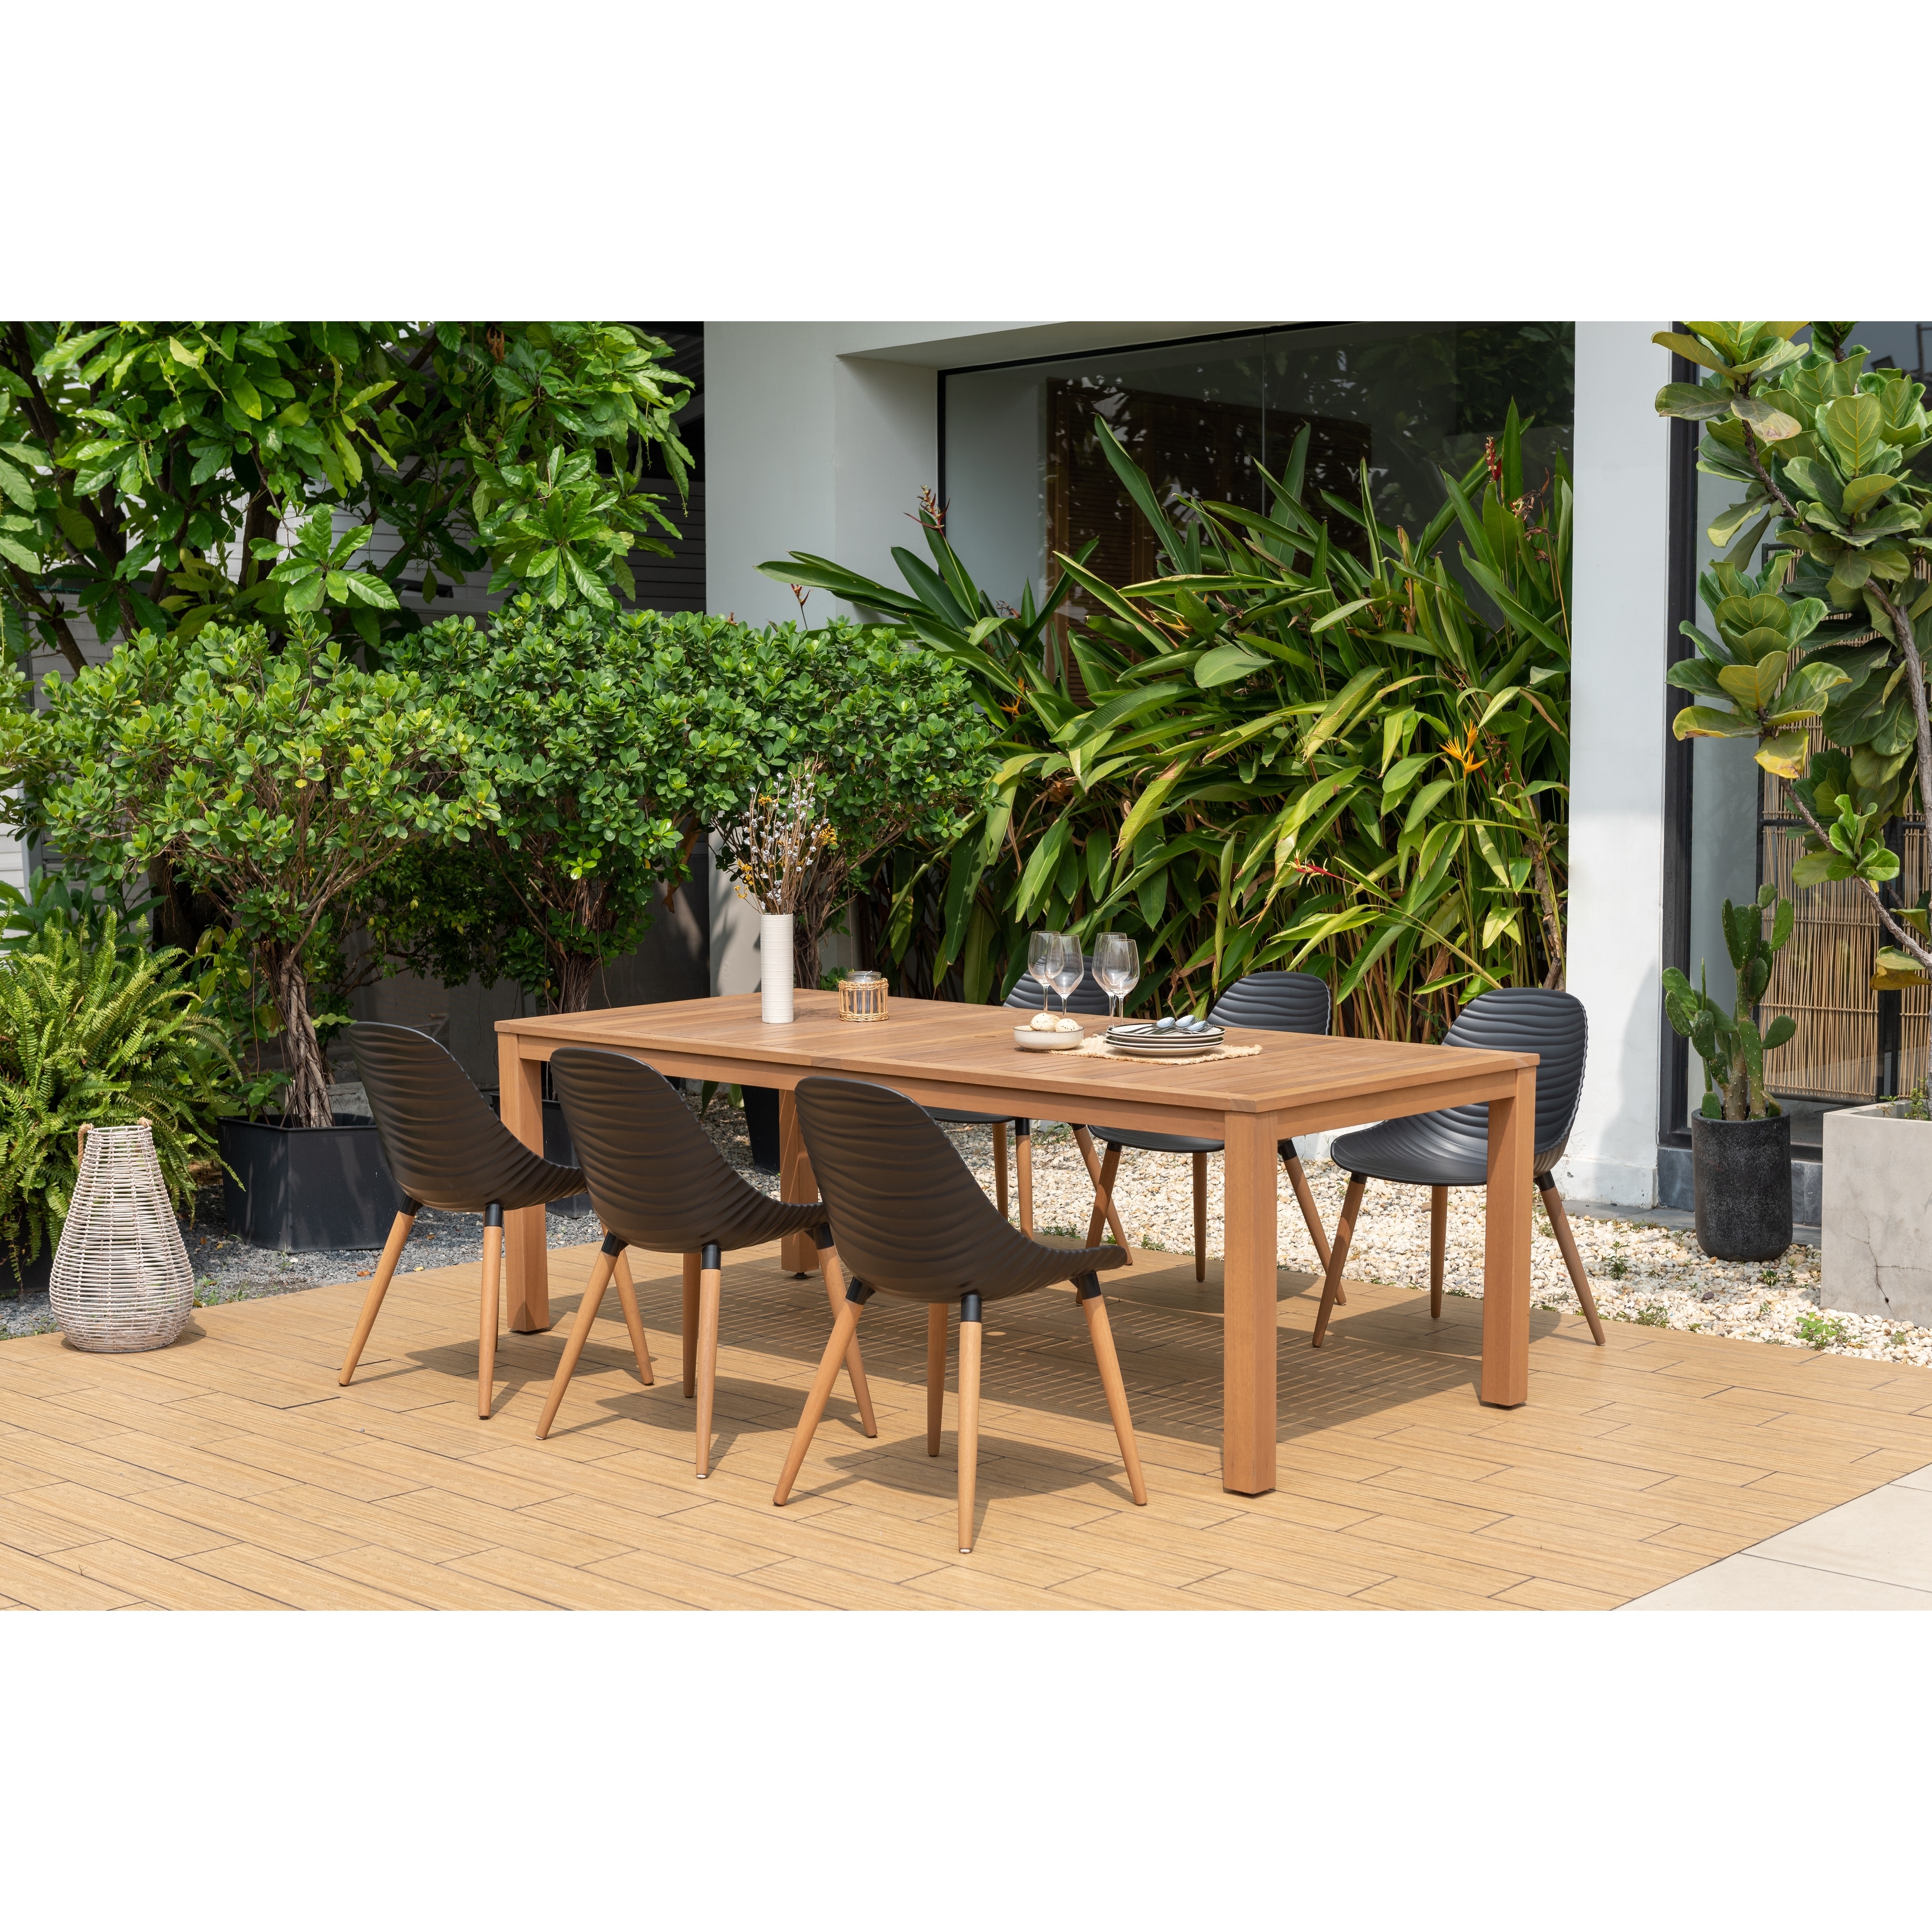 Amazonia Sunny Fsc Certified Outdoor Patio Dining Set